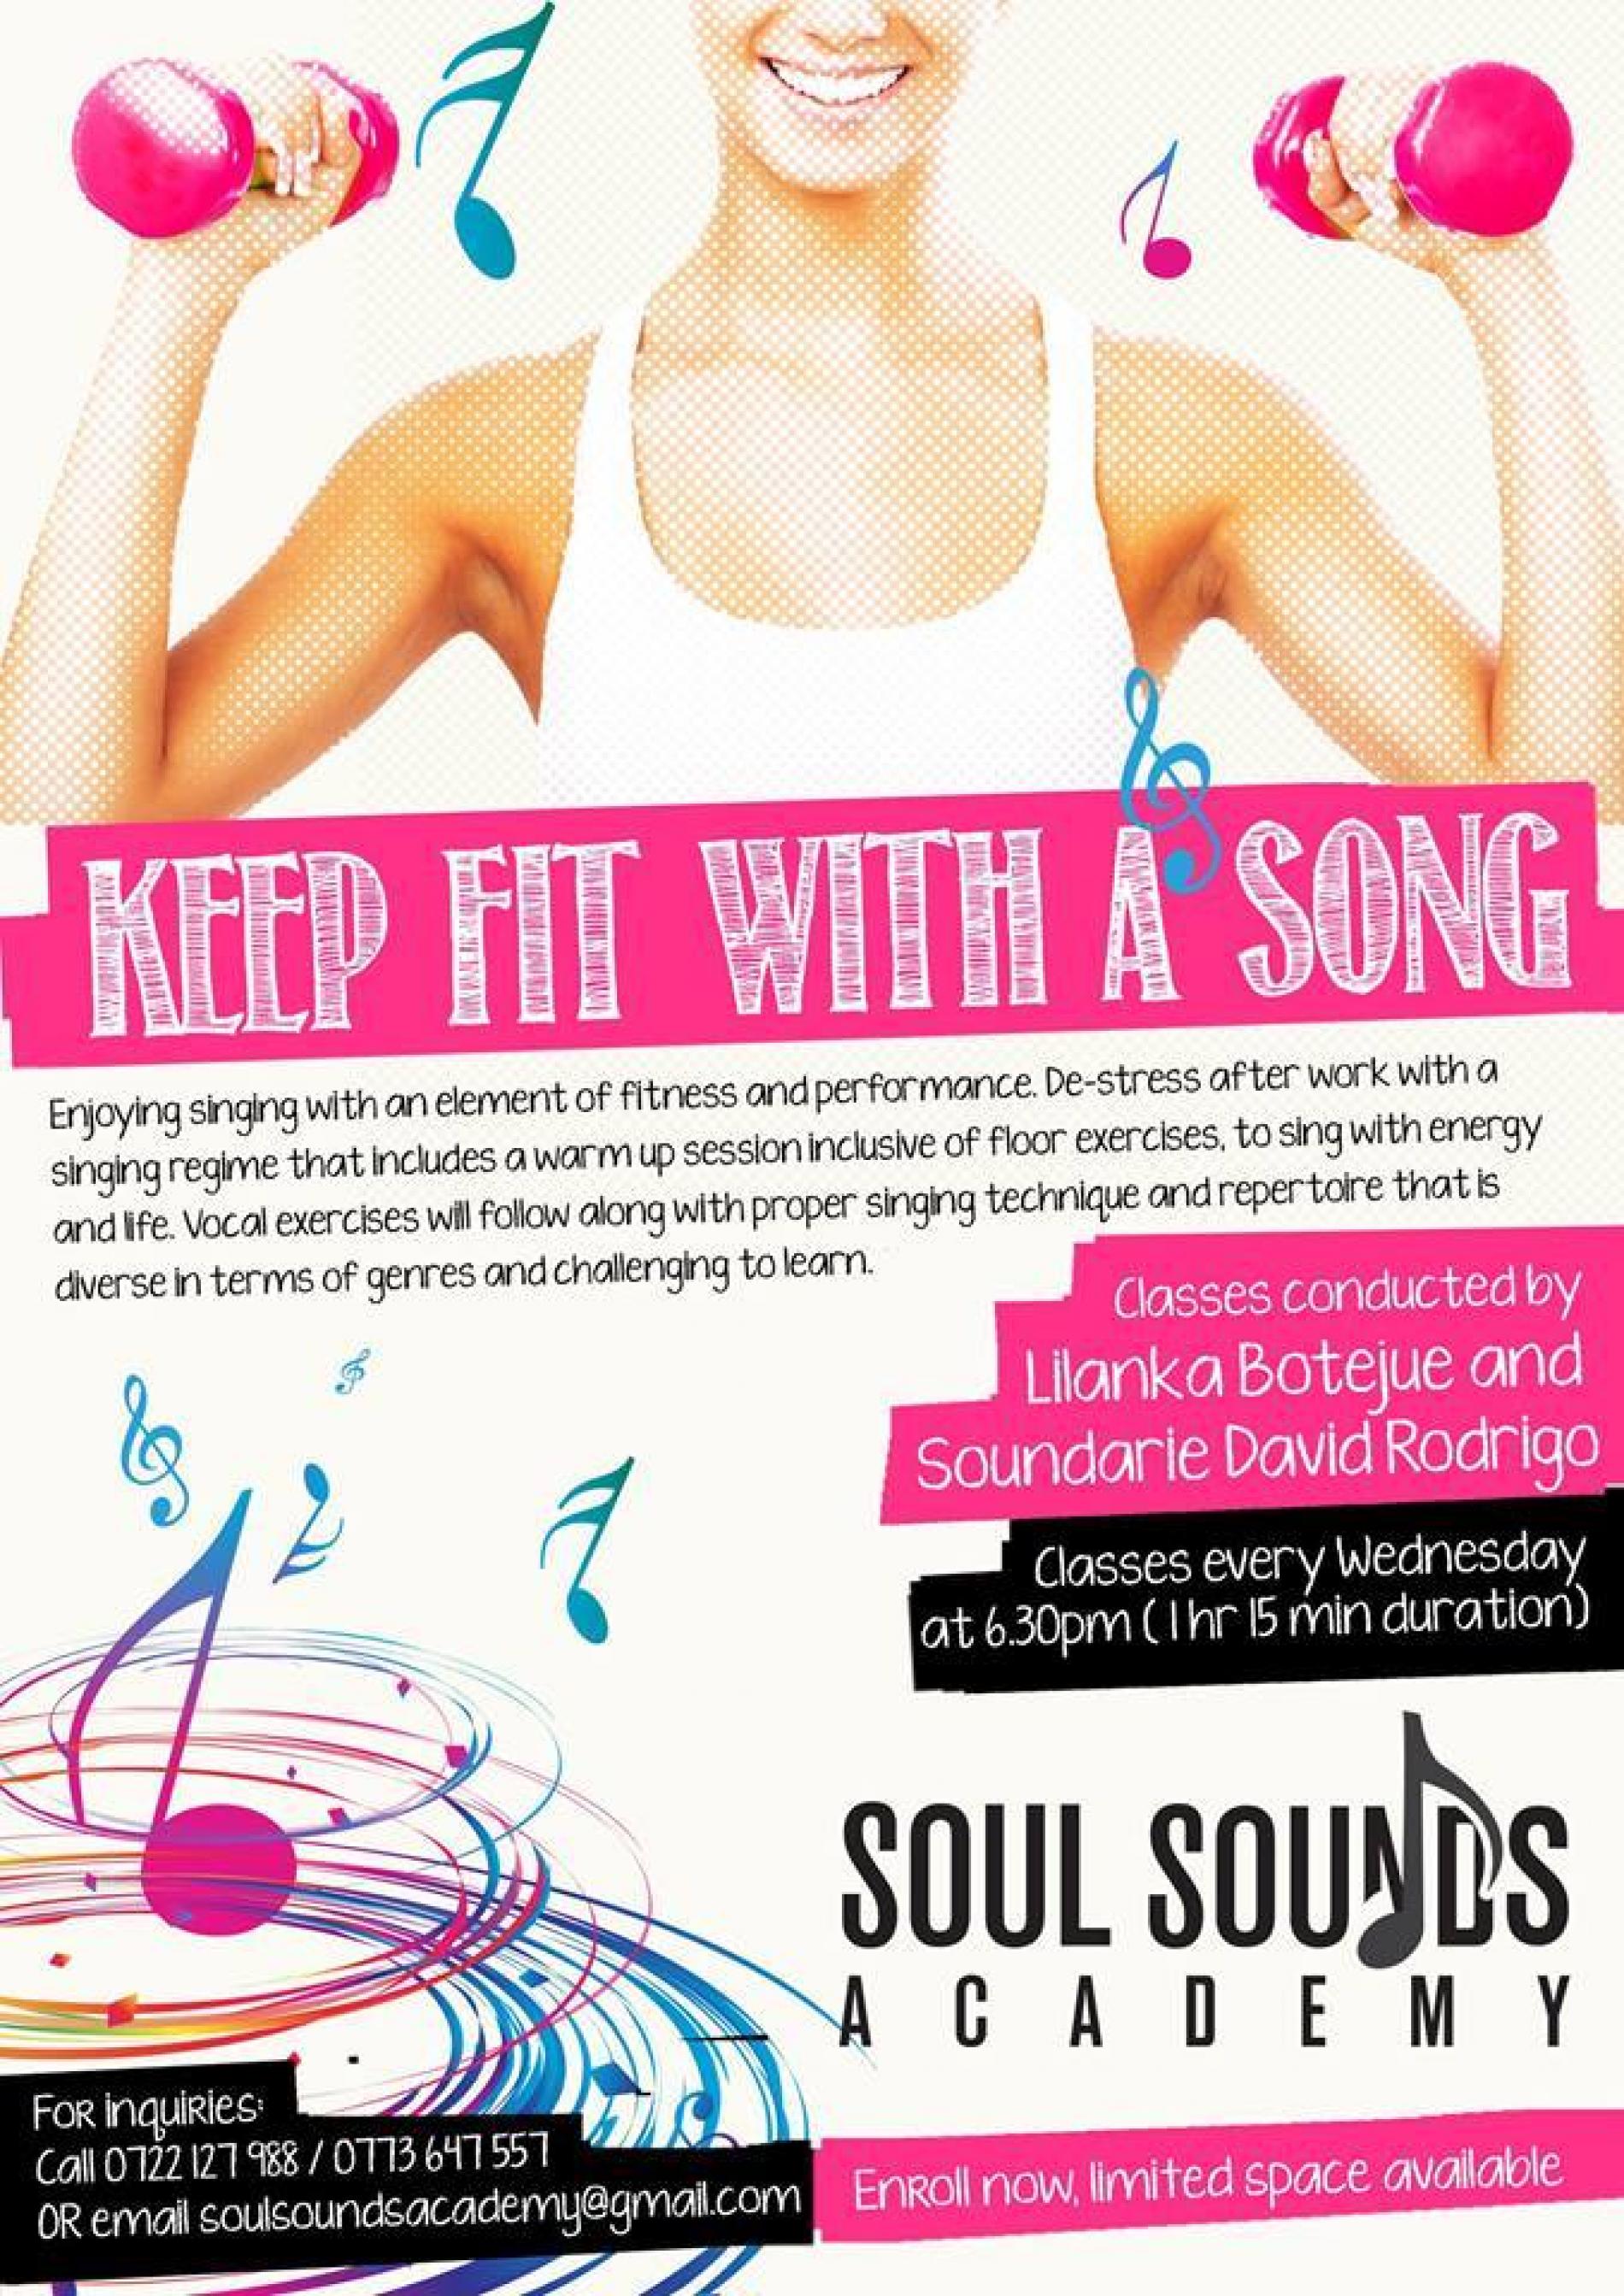 Soul Sounds Offer A Pretty Neat Fitness Solution And It’s Not What You Think =)